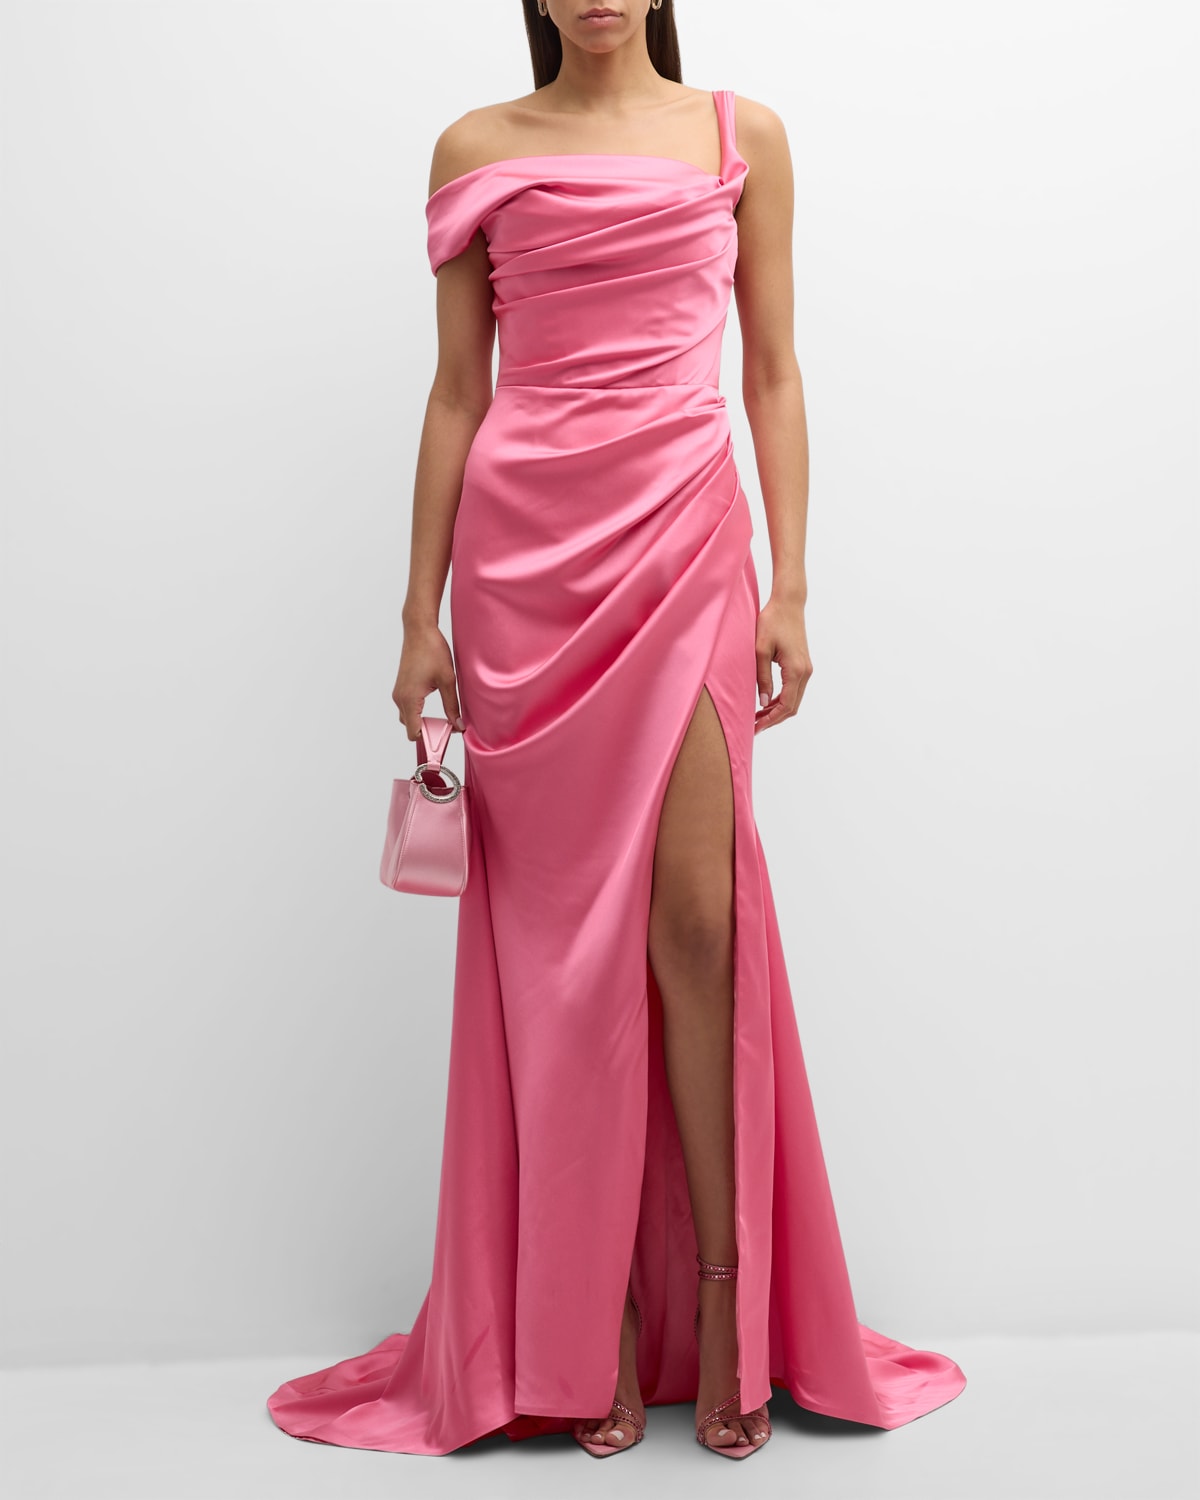 Gigii's Rosario Ruched One-shoulder A-line Gown In Iconic Pink Ip67